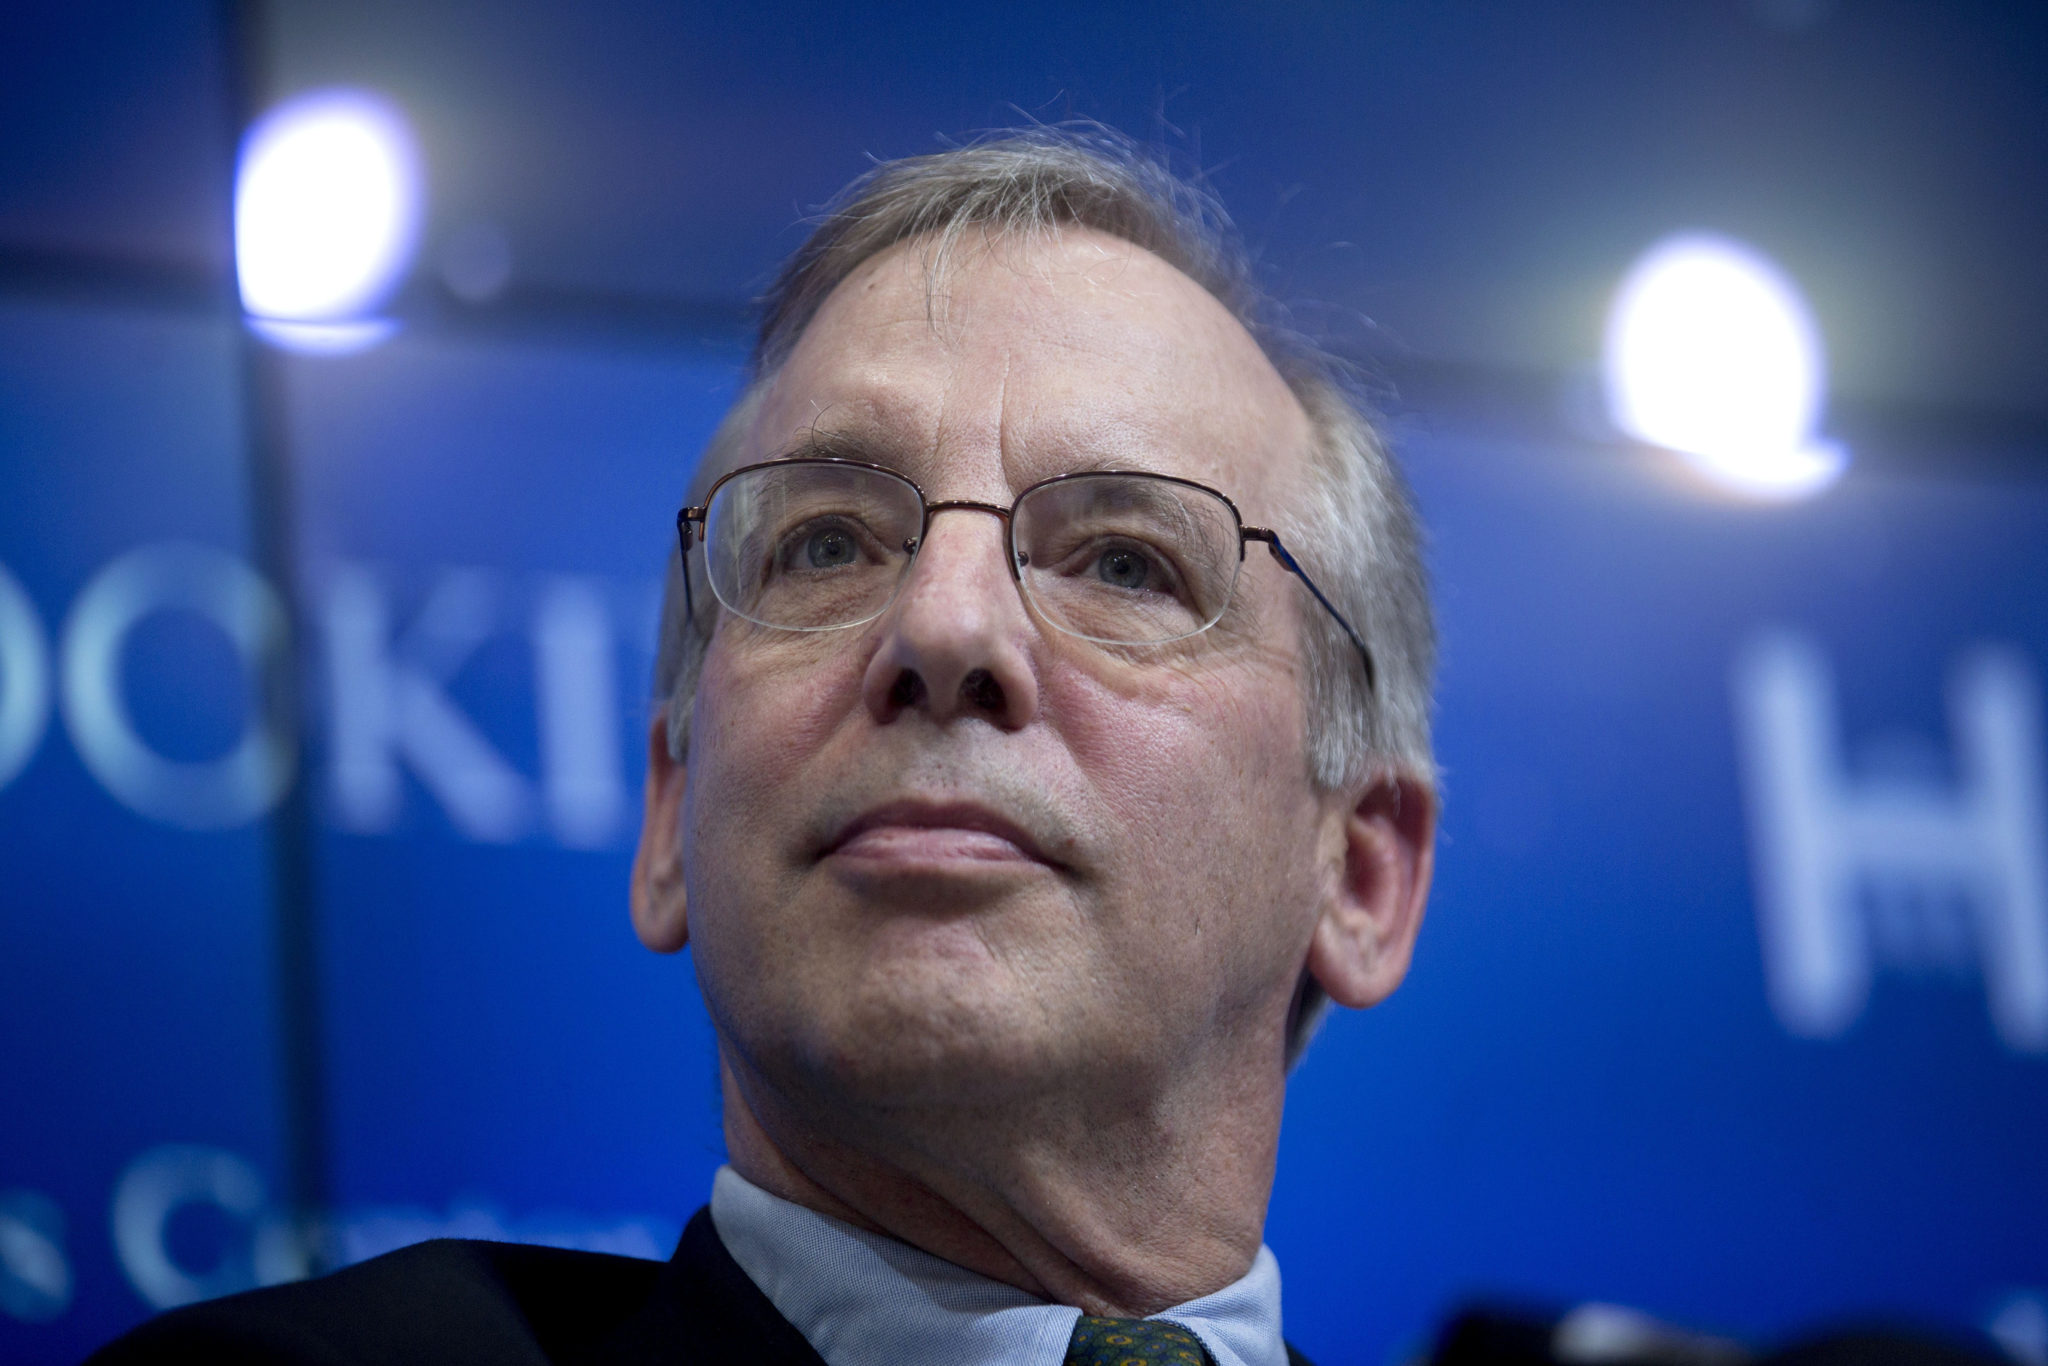 WILLIAM DUDLEY, president and chief executive officer of the Federal Reserve Bank of New York, says the risk of an overheating U.S. economy in the next few years, partly fueled by tax cuts, reinforces the case for continued gradual interest-rate increases. / BLOOMBERG FILE PHOTO/ANDREW HARRER